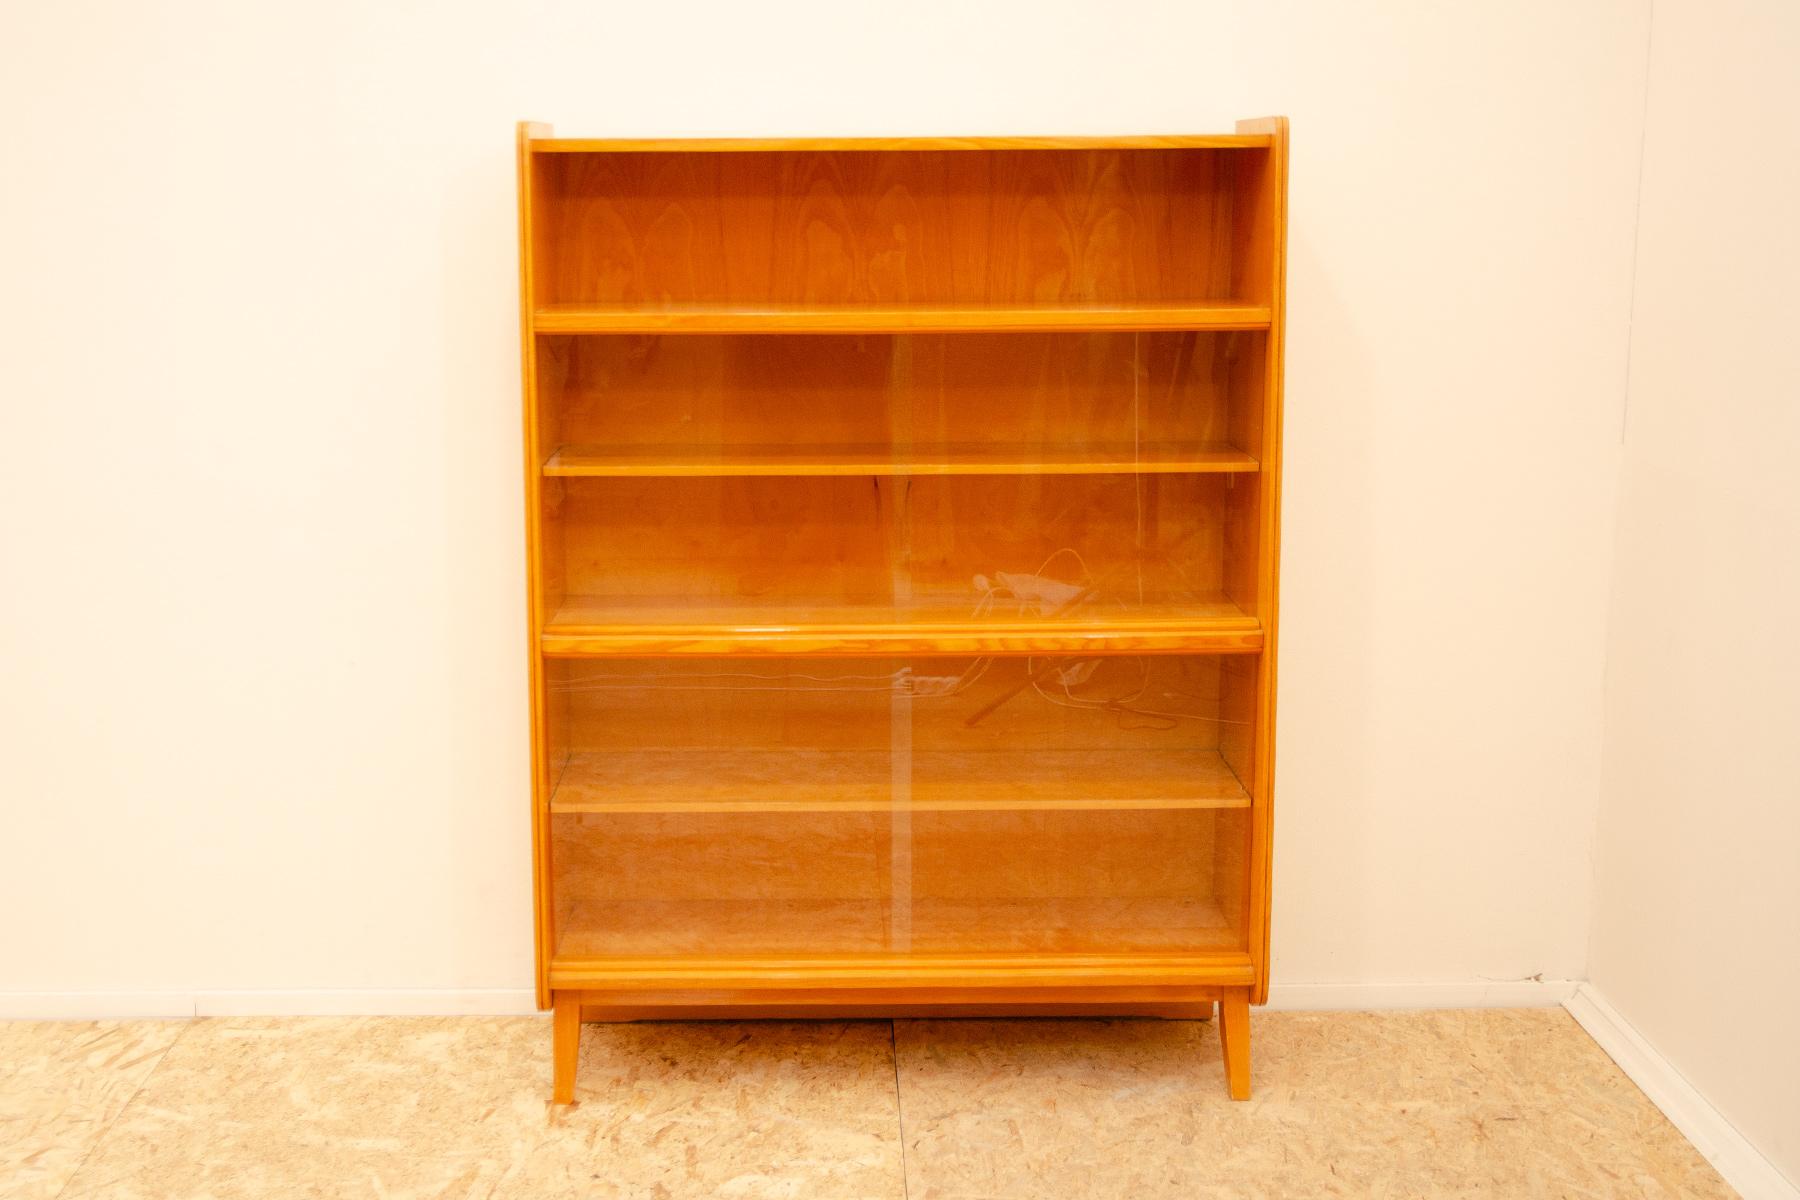 Mid century Vintage bookcase from the 1960´s. It was designed by František Jirák and was manufactured by Jitona company in the former Czechoslovakia. Features a simple design, a glazed section with five storage spaces. Overall in very good Vintage